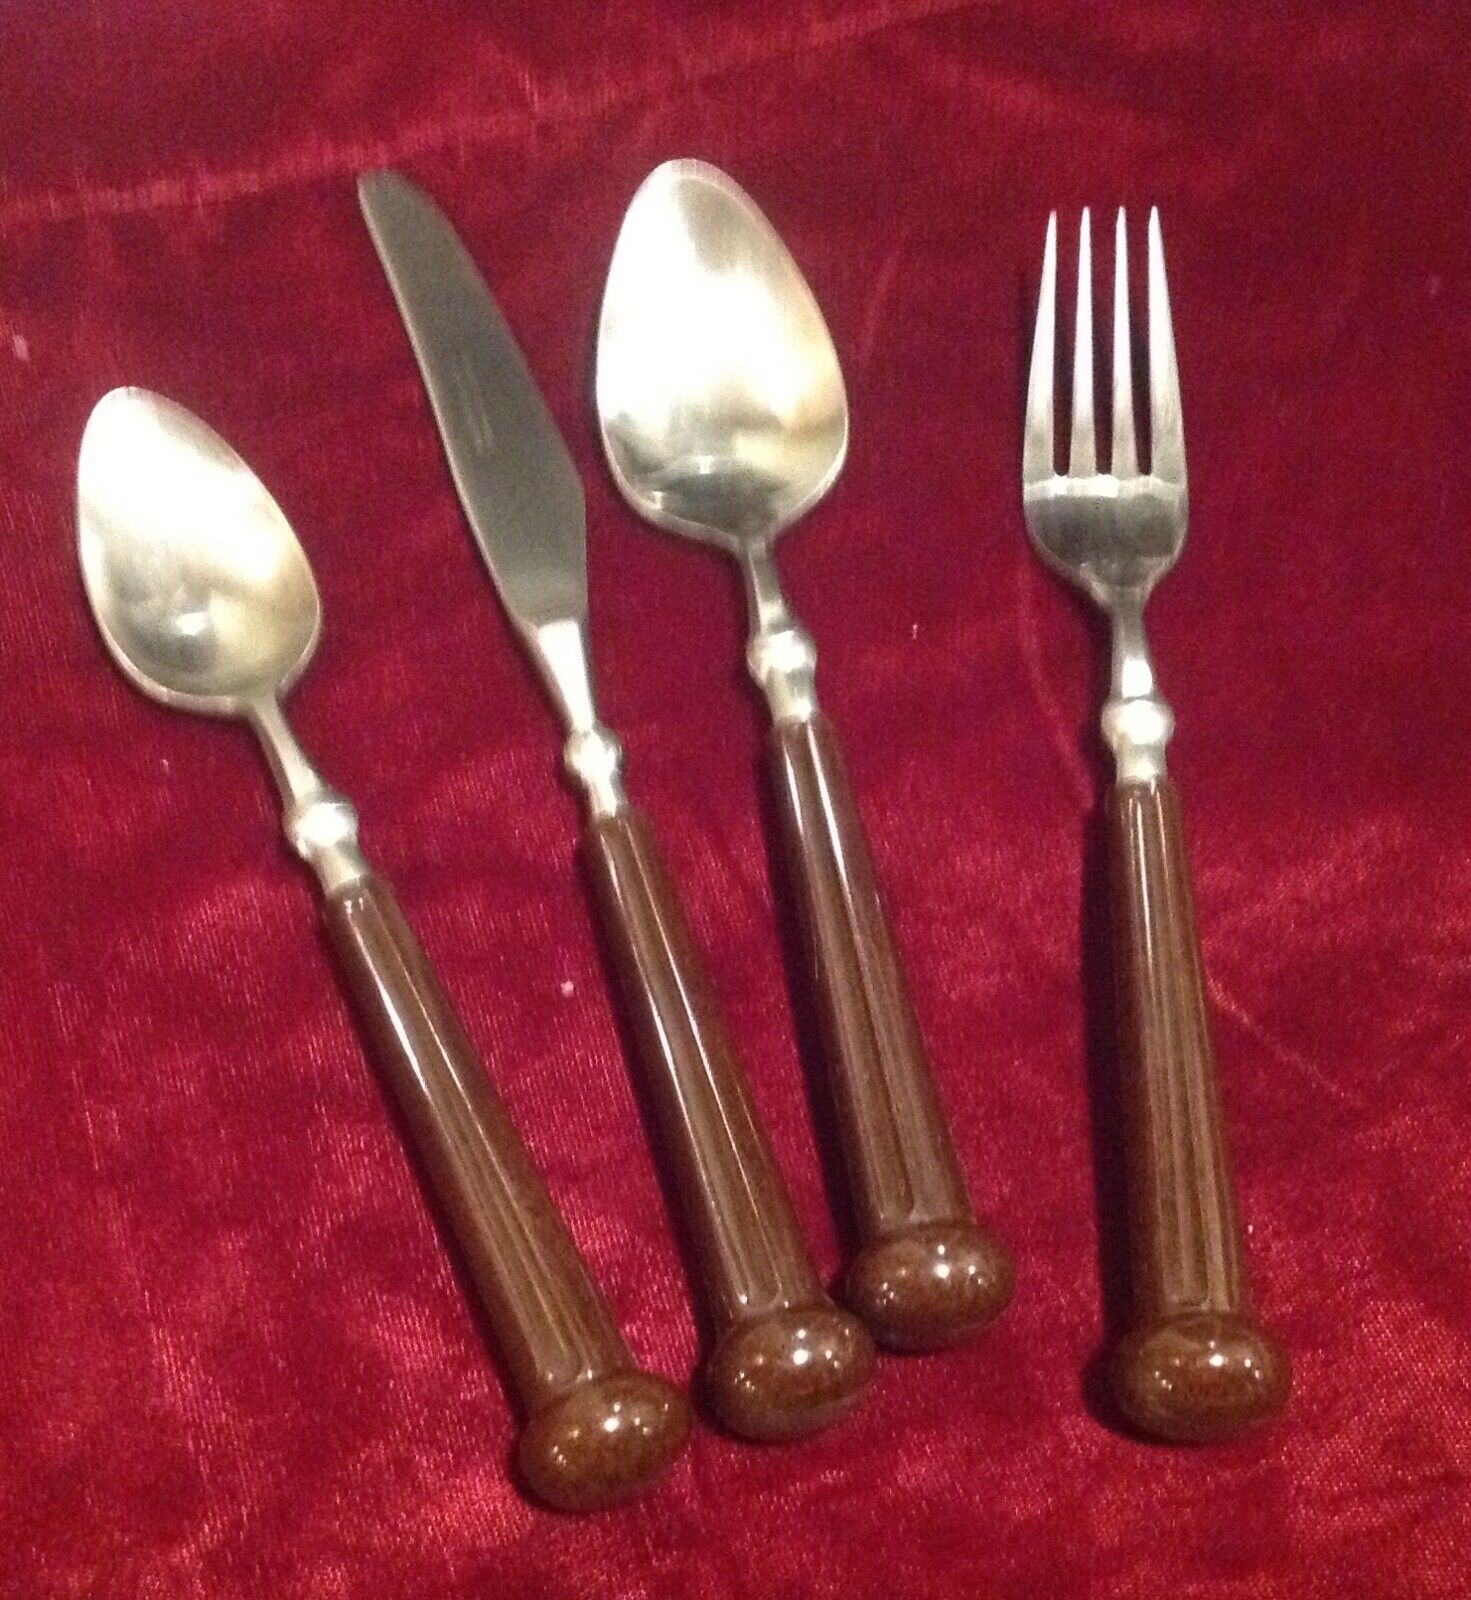 Vintage Oxford Hall Fashion - Wear Brown Stainless 4 piece place setting